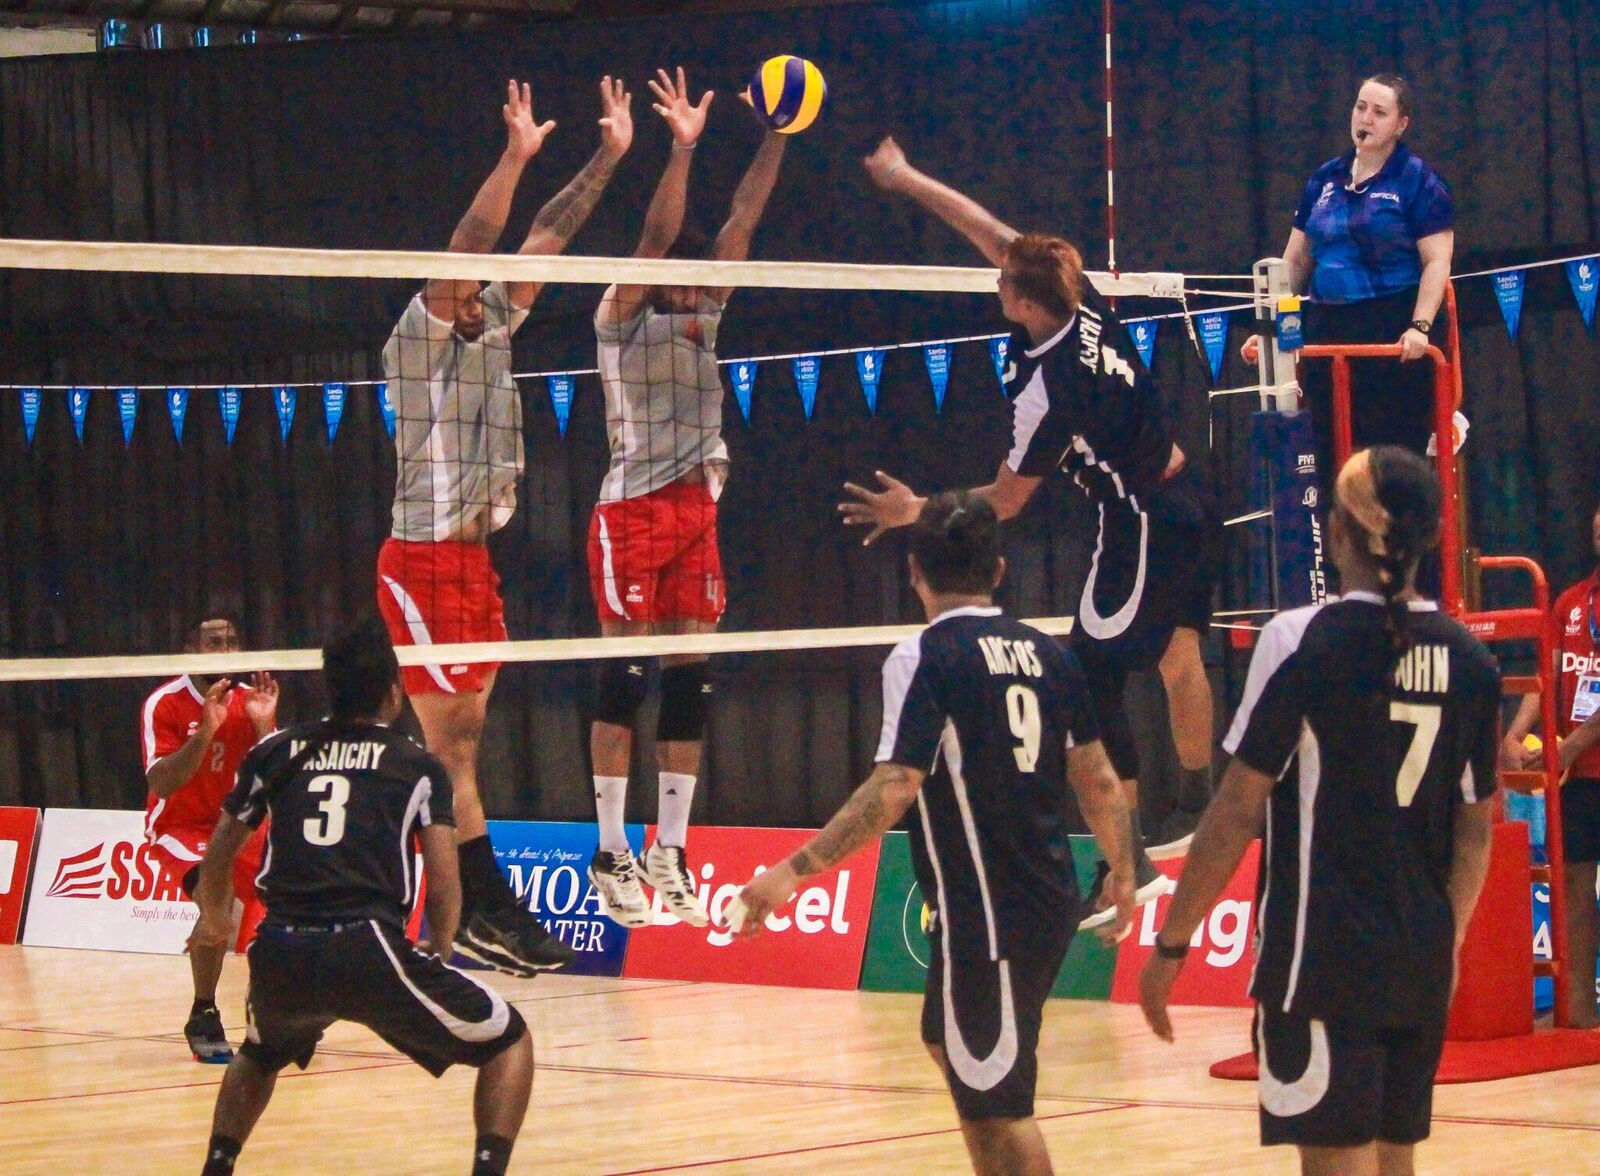 The volleyball competition began on Thursday at the National University of Samoa ©Games News Service